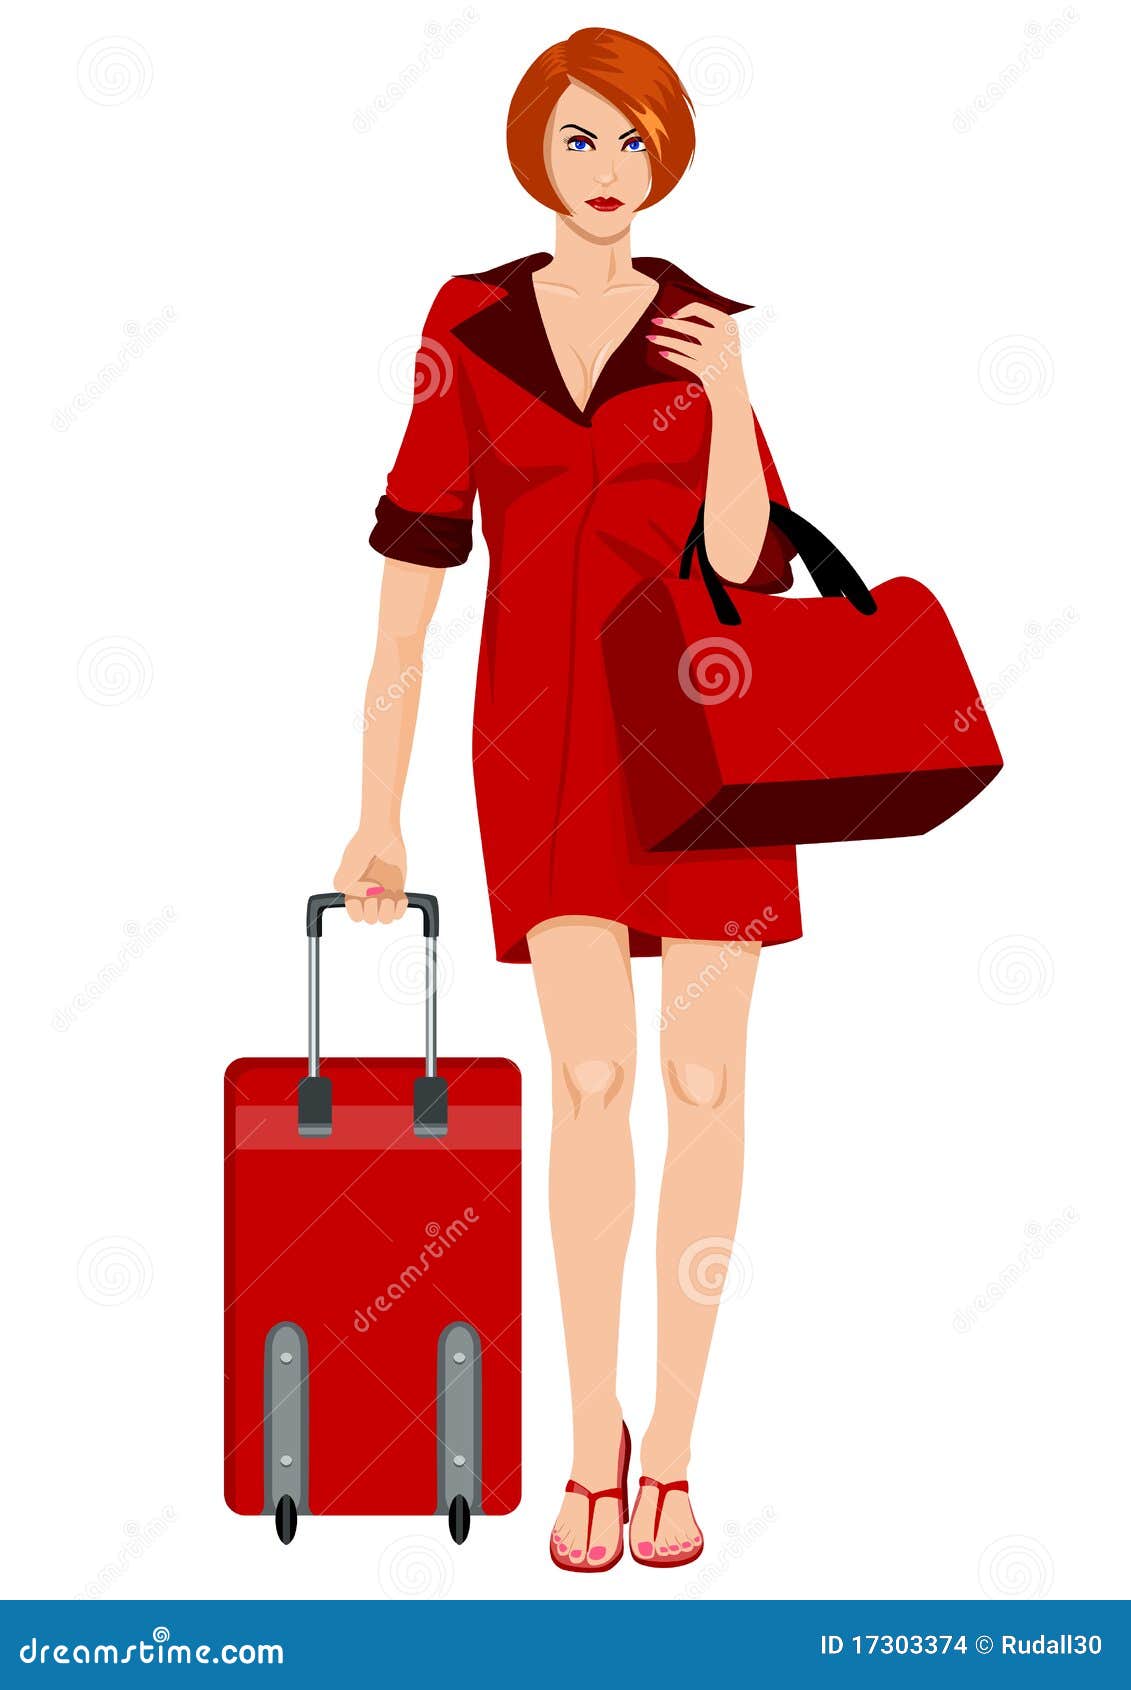 Woman Carrying Luggage stock vector. Illustration of cartoon - 17303374